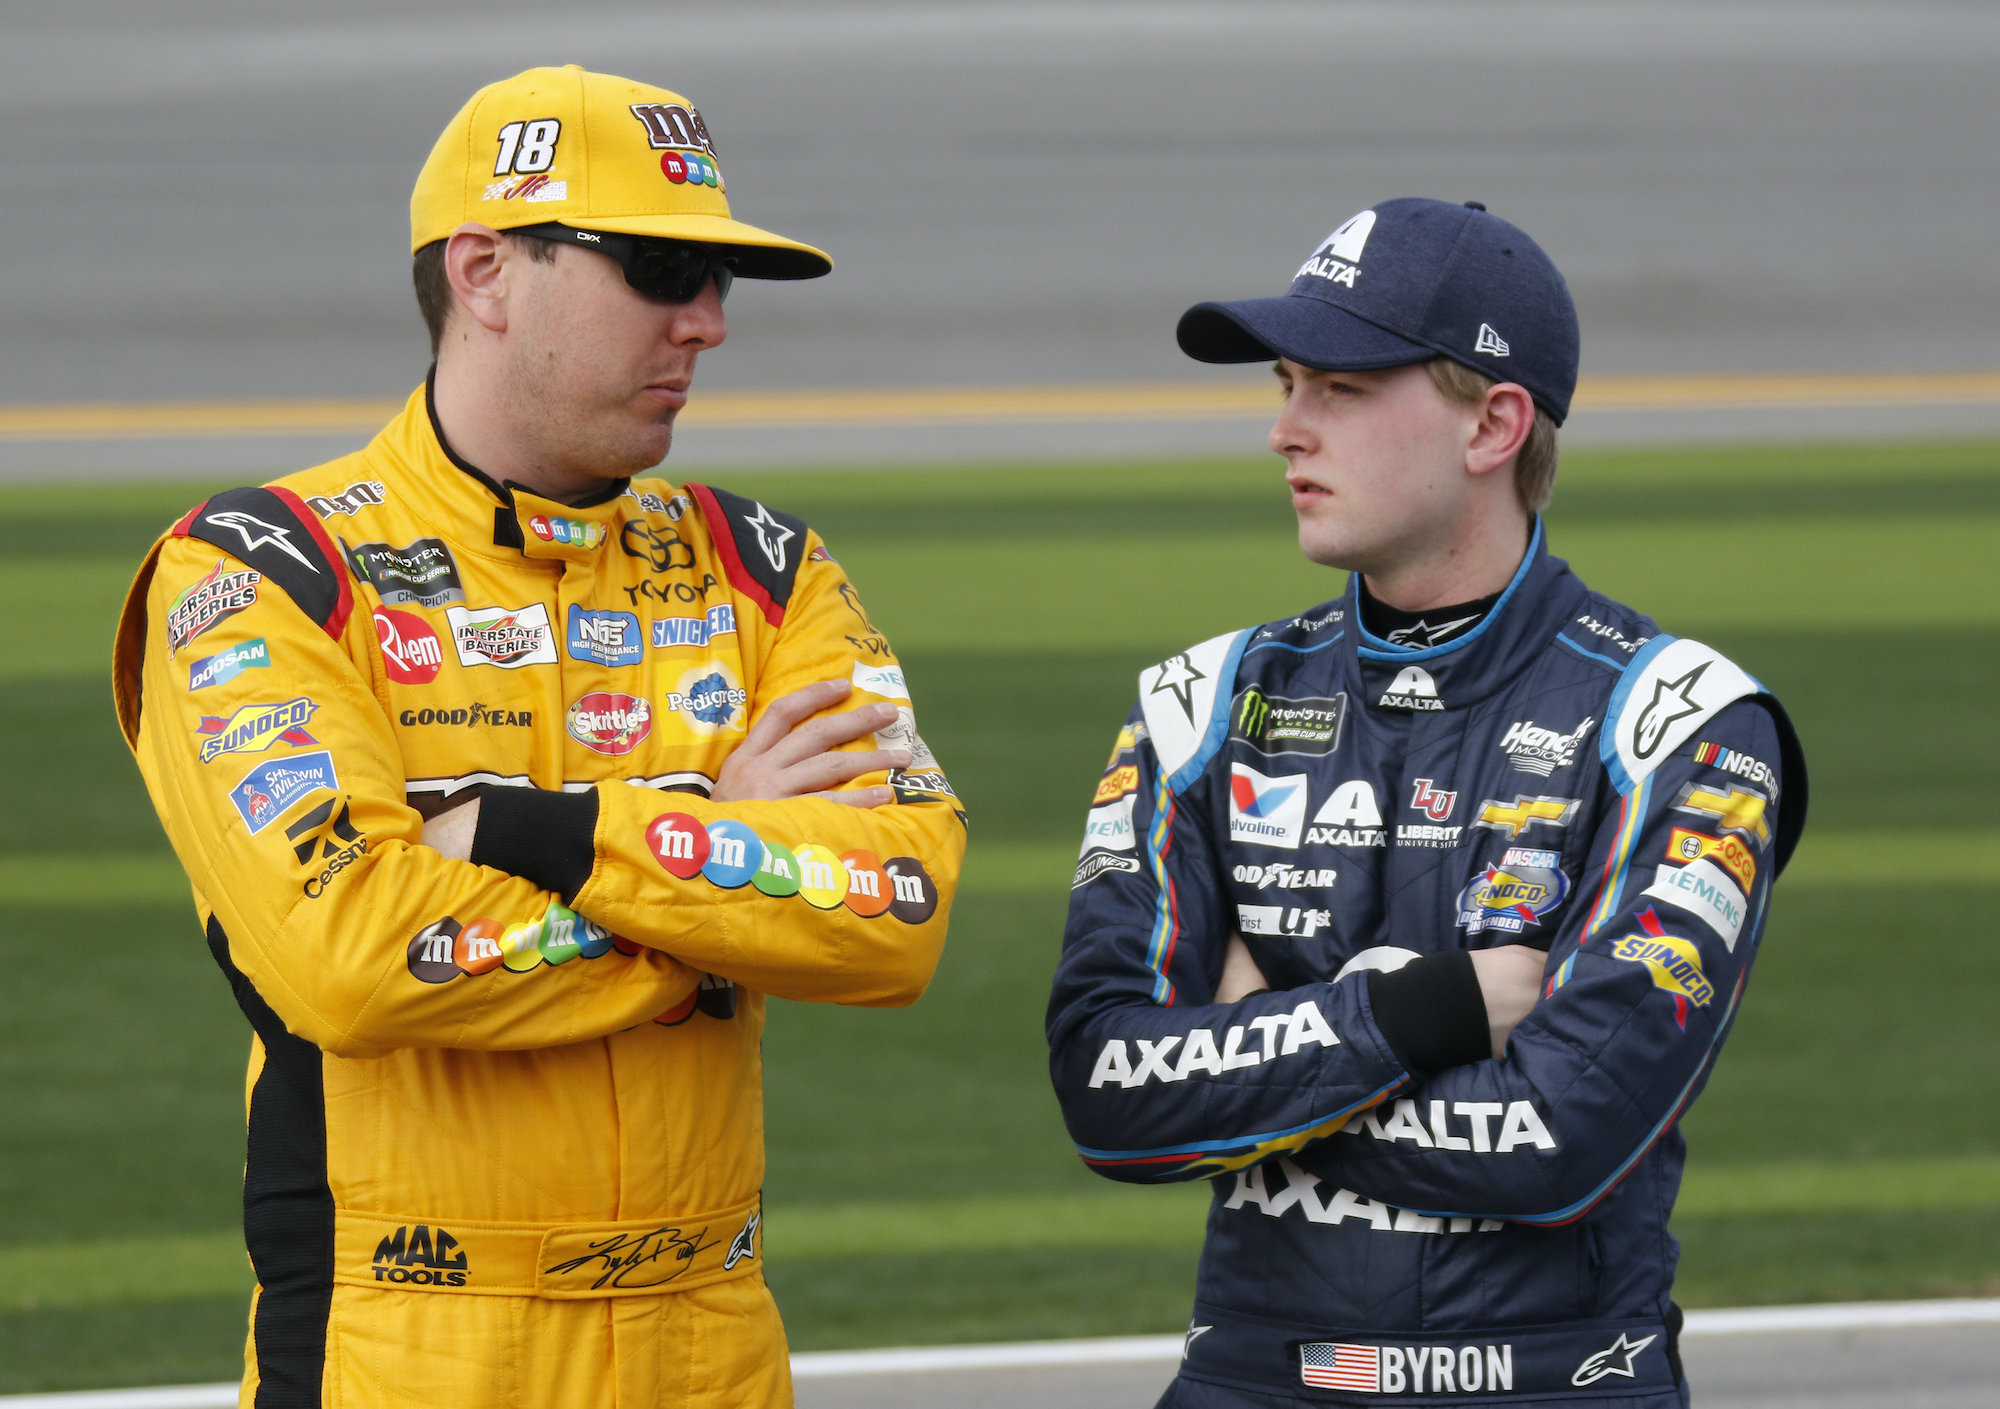 Kyle Busch Talks About William Byron and Admits He’s Still ‘Pissed’ About a Move the HMS Driver Made Years Ago